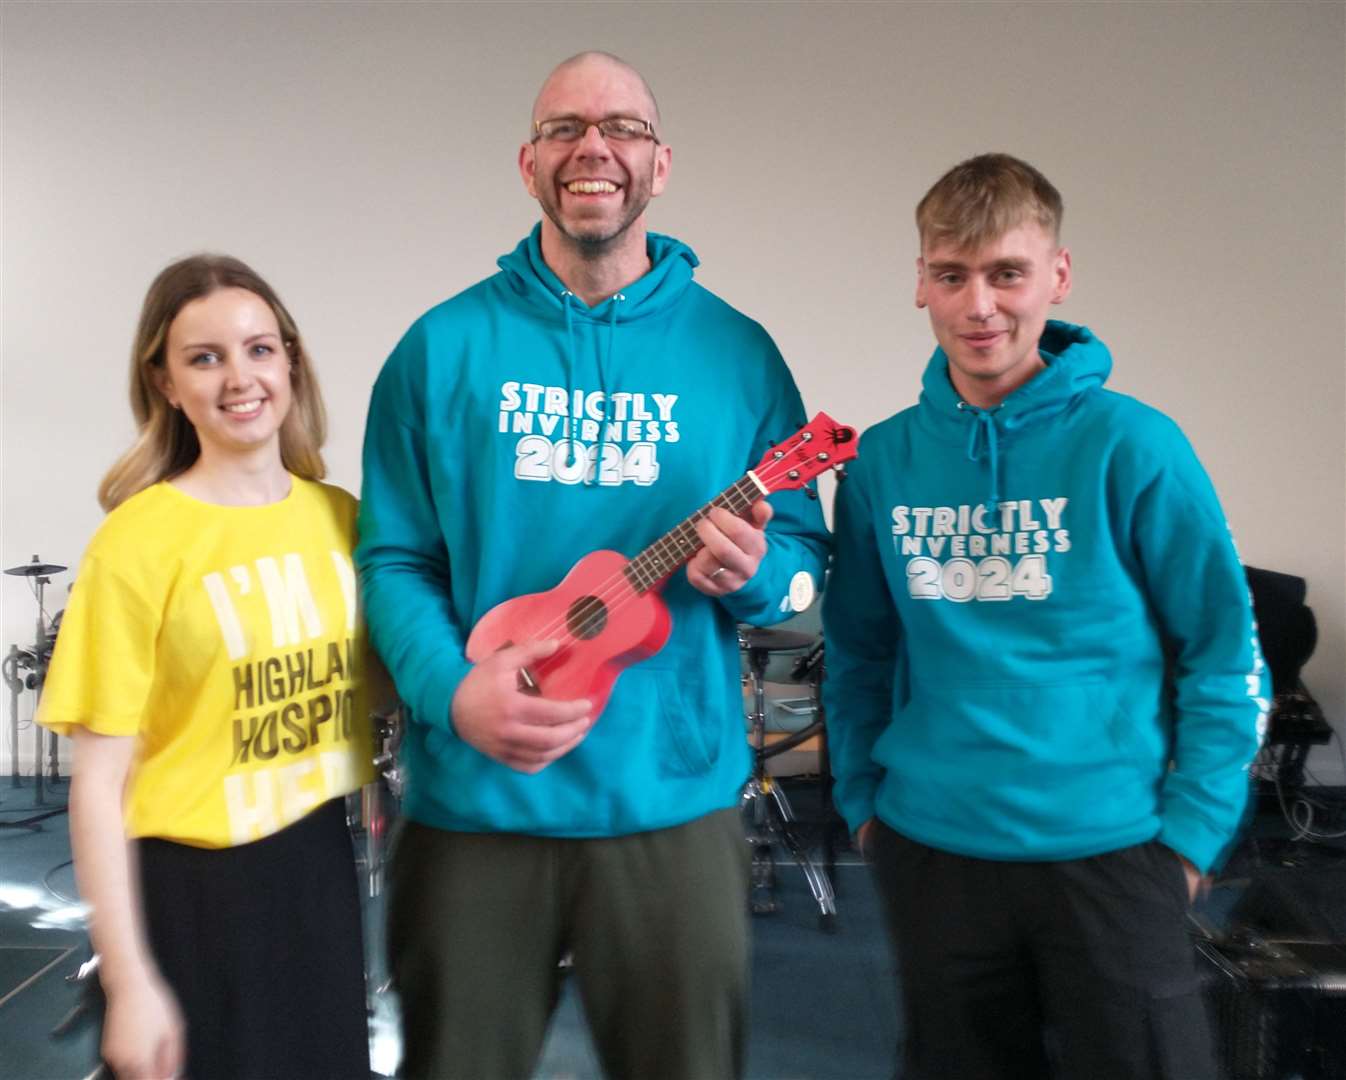 Kenna Ross, Andy Dixon (with a ukulele won in a lucky numbers game) and Shaun Rose, at a talent show for local youngsters.